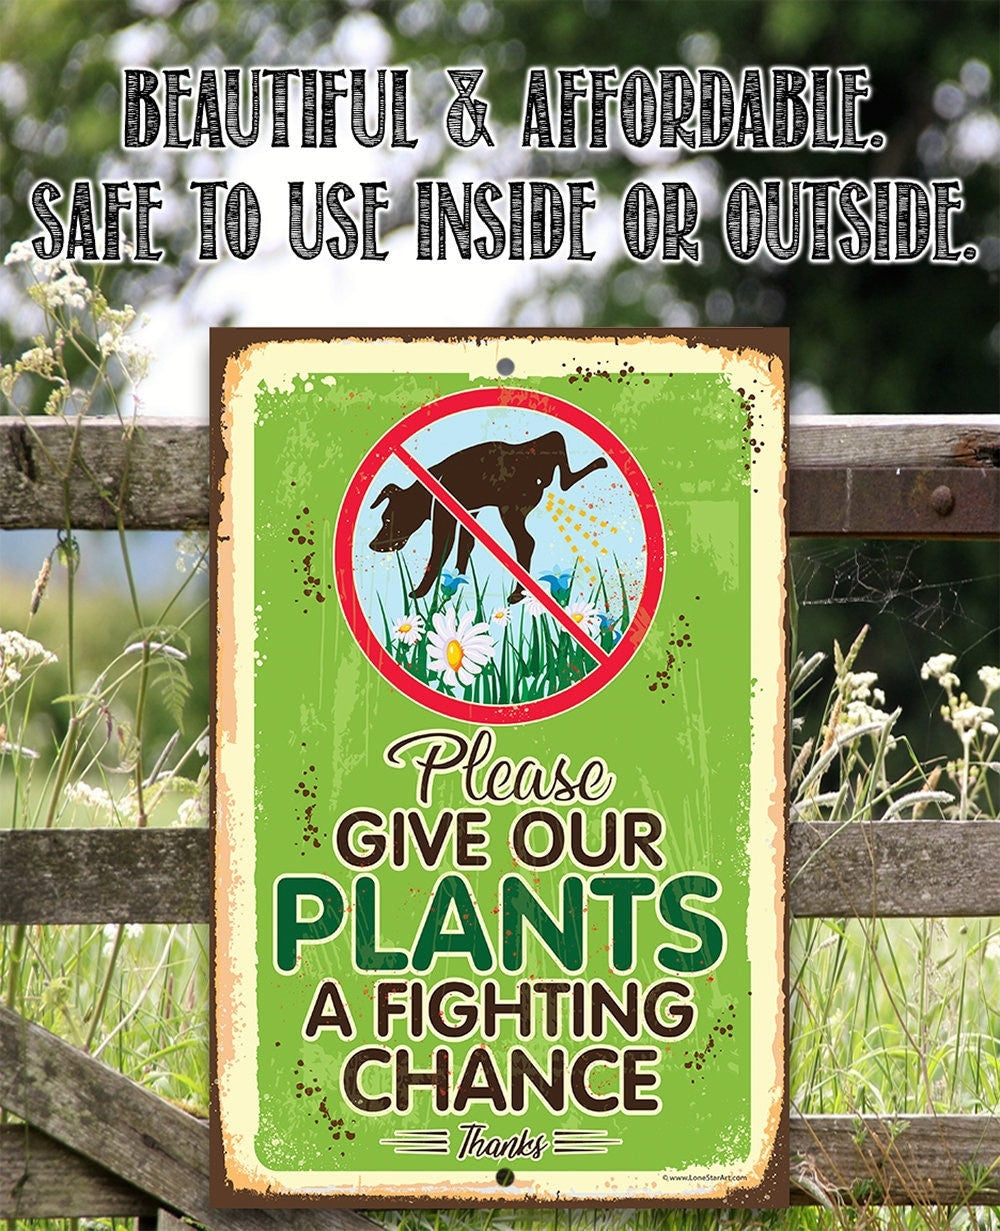 Please Give Our Plants a Fighting Chance - Do Not Pee or Poop Here Signage - 8" x 12" or 12" x 18" Aluminum Tin Awesome Metal Poster